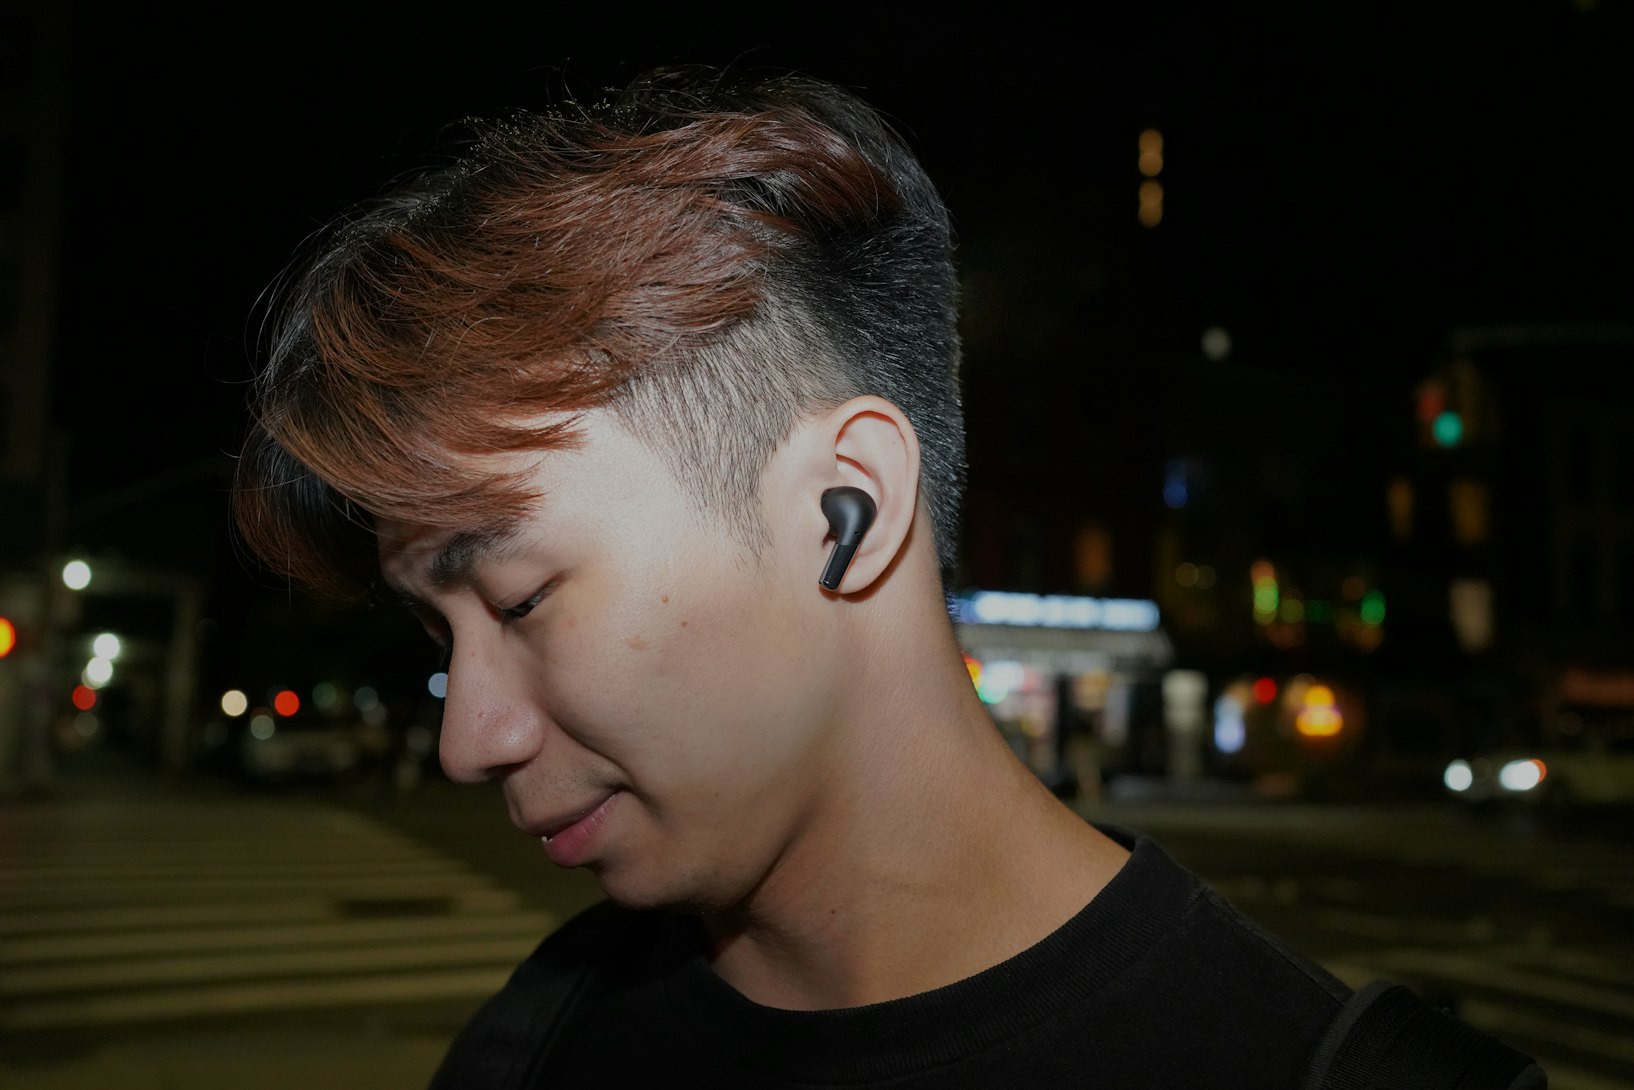 OnePlus Buds Pro review: The comfiest ANC wireless earbuds I’ve ever used